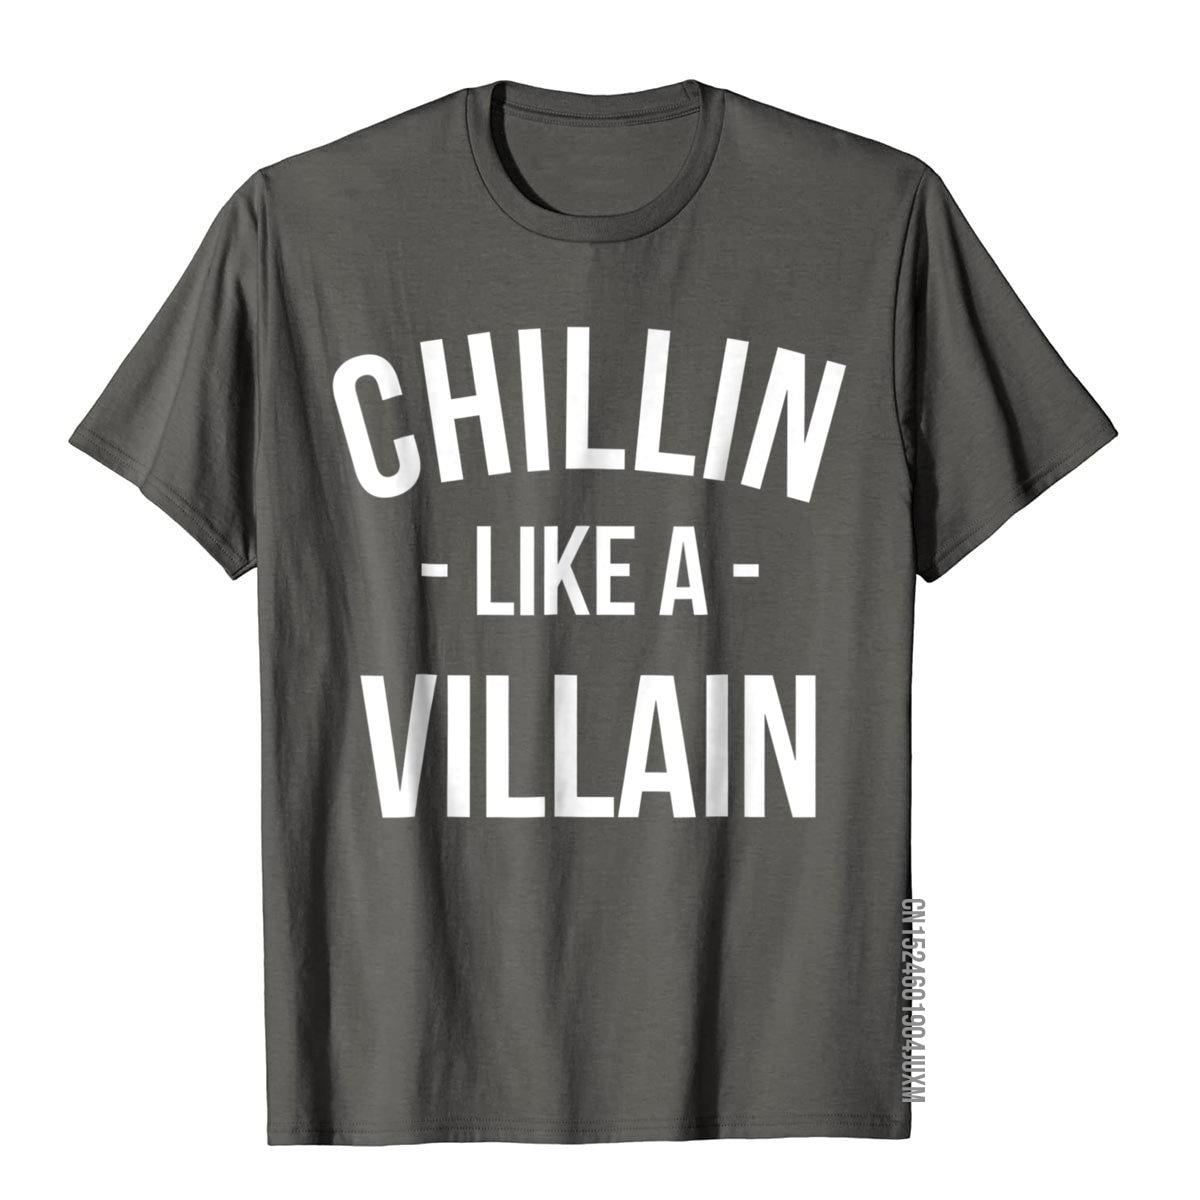 Funny T-Shirt Chillin Like A Villain Cotton Tops & Tees For Men England ...